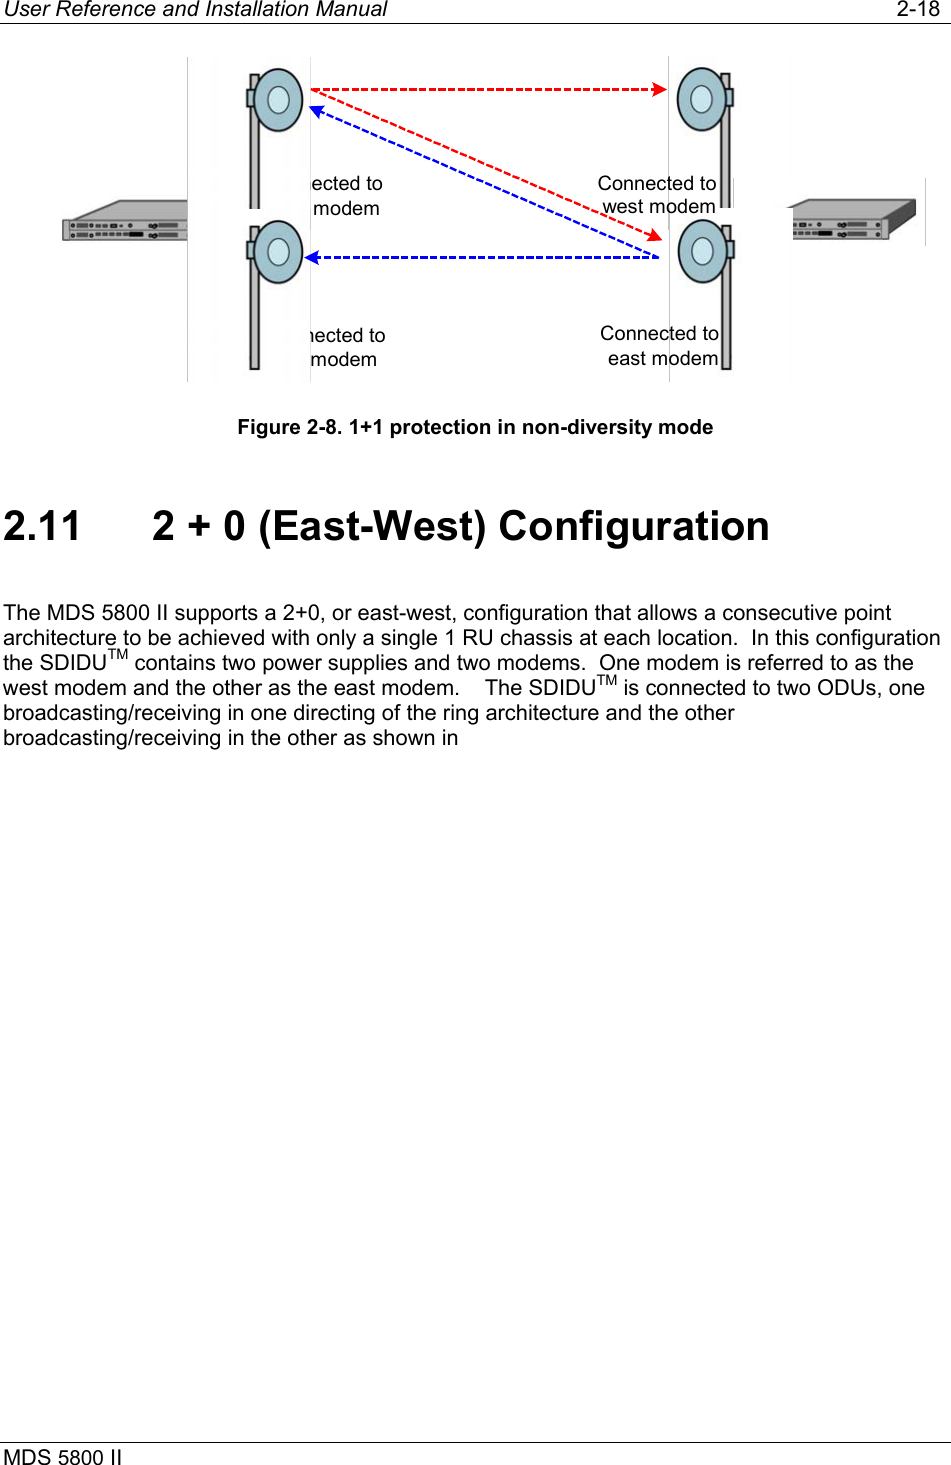 User Reference and Installation Manual   2-18 MDS 5800 II      Connected towest modemConnected toeast modemConnected towest modemConnected toeast modem Figure 2-8. 1+1 protection in non-diversity mode 2.11  2 + 0 (East-West) Configuration  The MDS 5800 II supports a 2+0, or east-west, configuration that allows a consecutive point architecture to be achieved with only a single 1 RU chassis at each location.  In this configuration the SDIDUTM contains two power supplies and two modems.  One modem is referred to as the west modem and the other as the east modem.    The SDIDUTM is connected to two ODUs, one broadcasting/receiving in one directing of the ring architecture and the other broadcasting/receiving in the other as shown in  